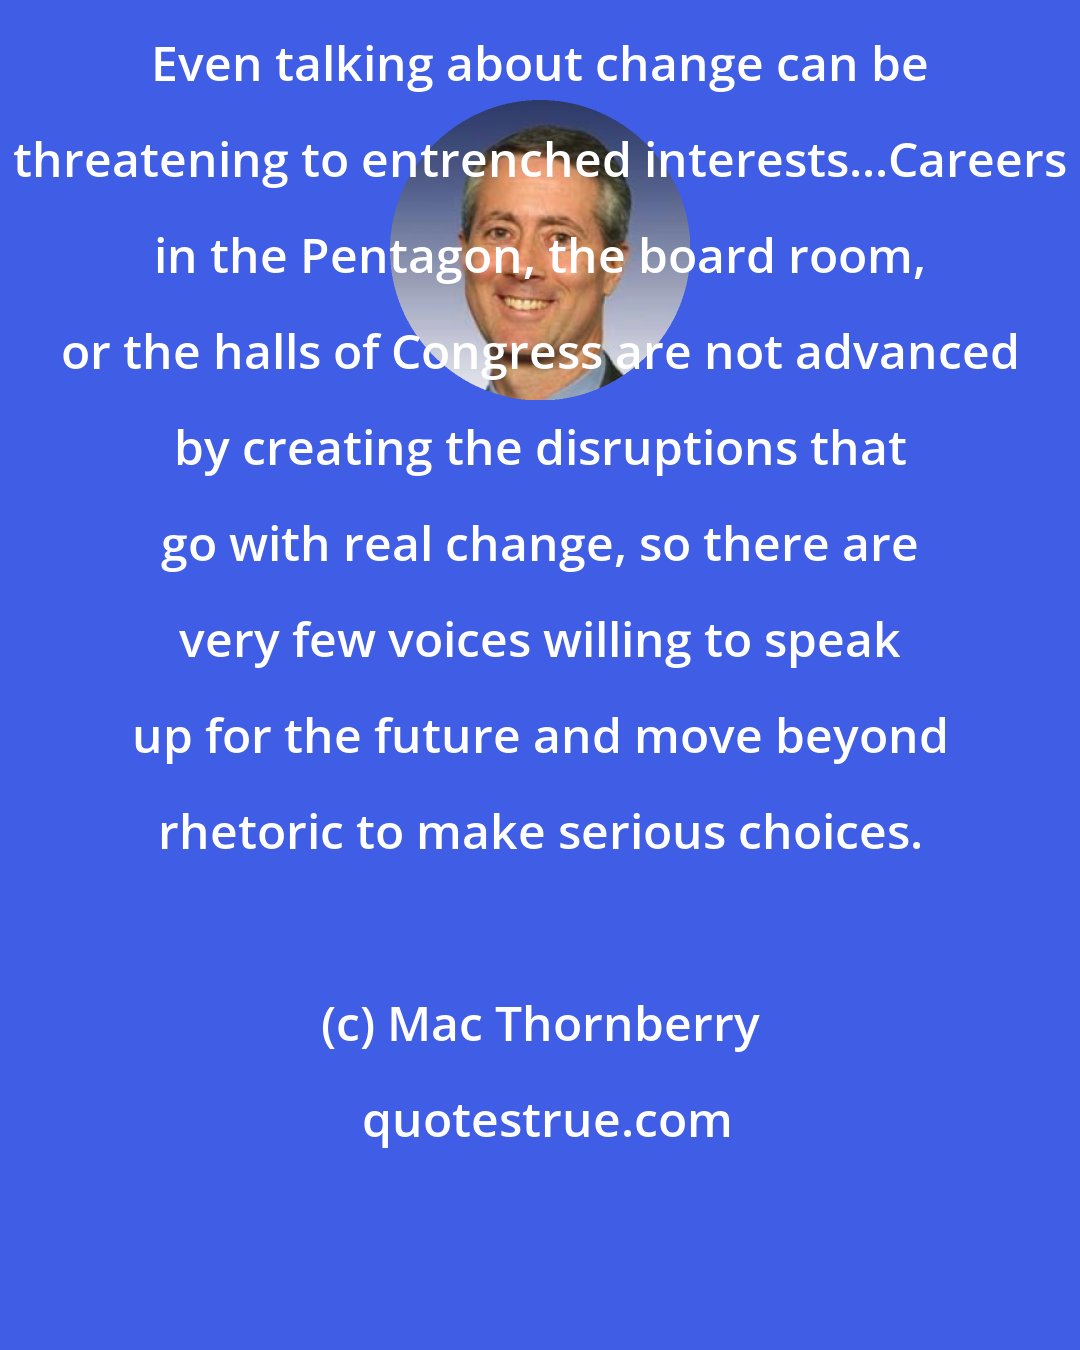 Mac Thornberry: Even talking about change can be threatening to entrenched interests...Careers in the Pentagon, the board room, or the halls of Congress are not advanced by creating the disruptions that go with real change, so there are very few voices willing to speak up for the future and move beyond rhetoric to make serious choices.